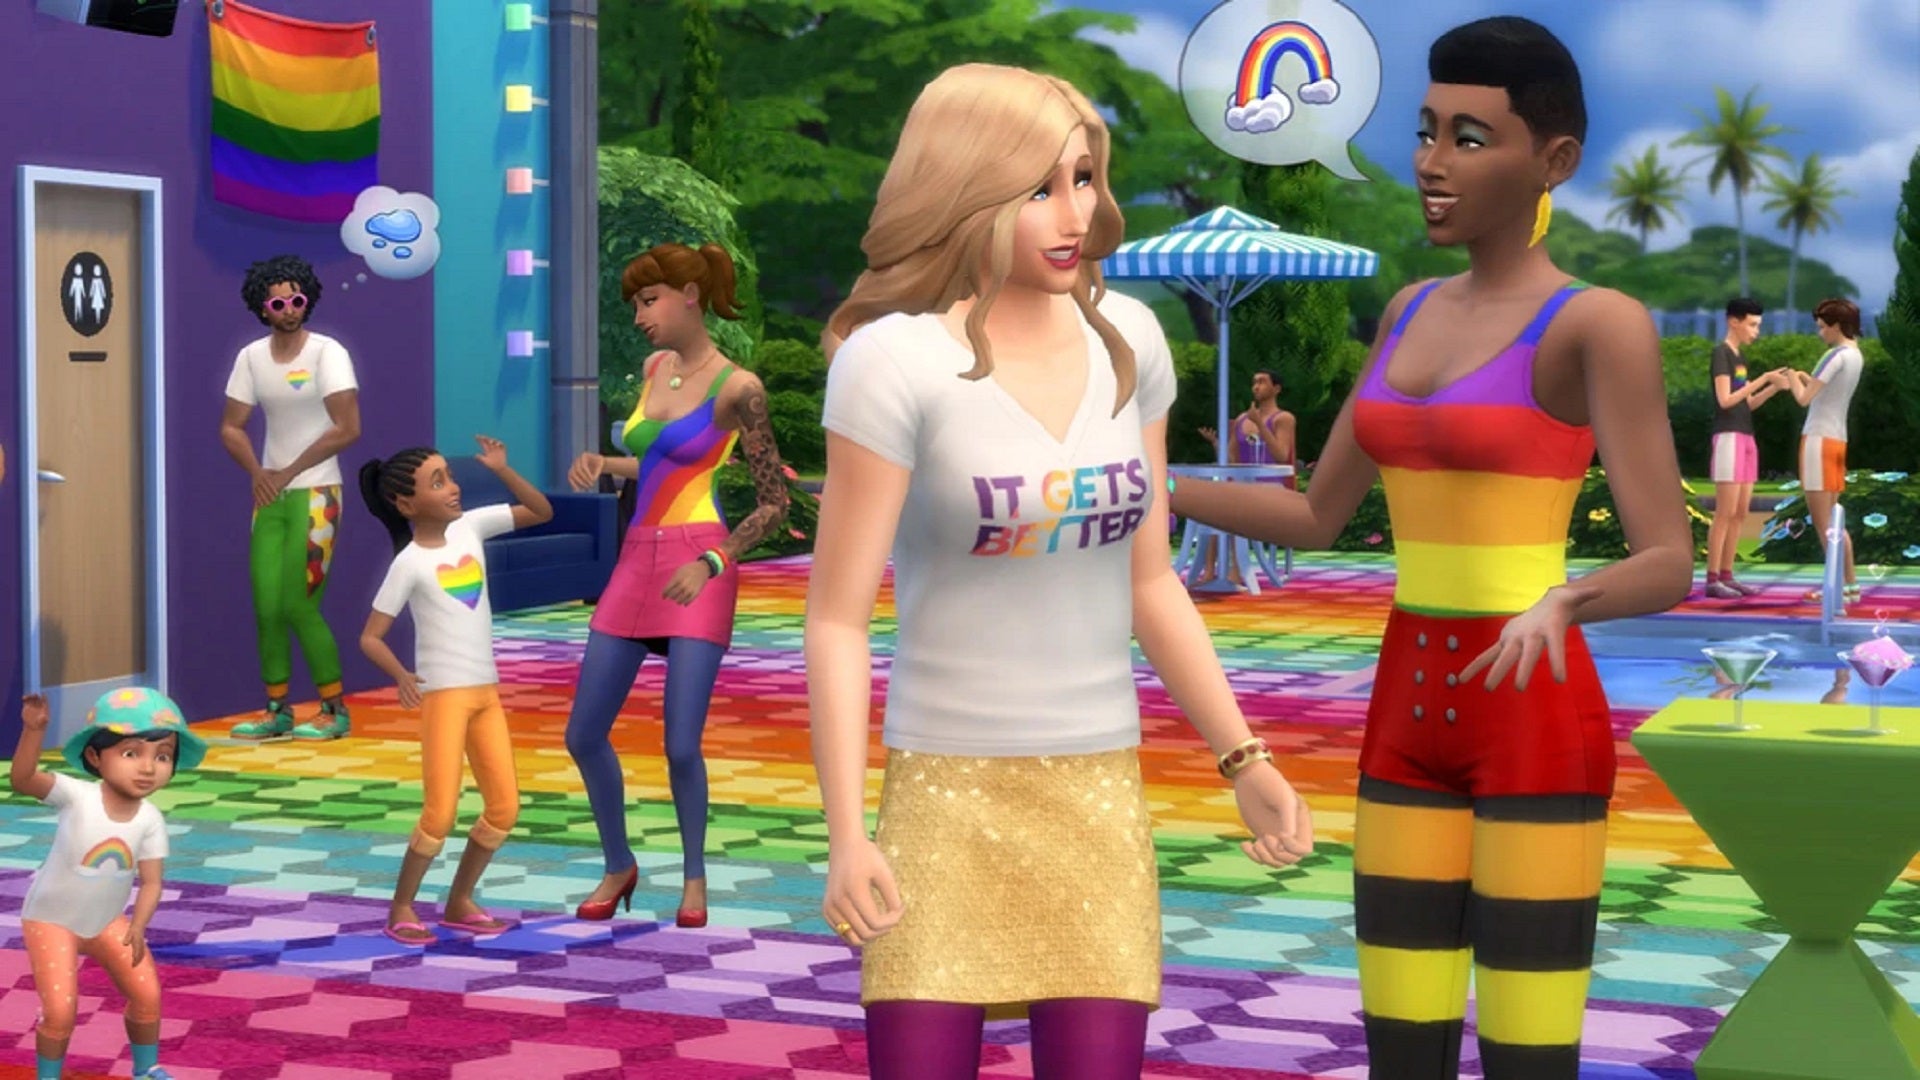 Pre-made Sims Dana Adler and Leanna Epps show off their customised gender-non conforming outfits and It Gets Better charity t-shirts, in a Pride Month screenshot from The Sims 4.